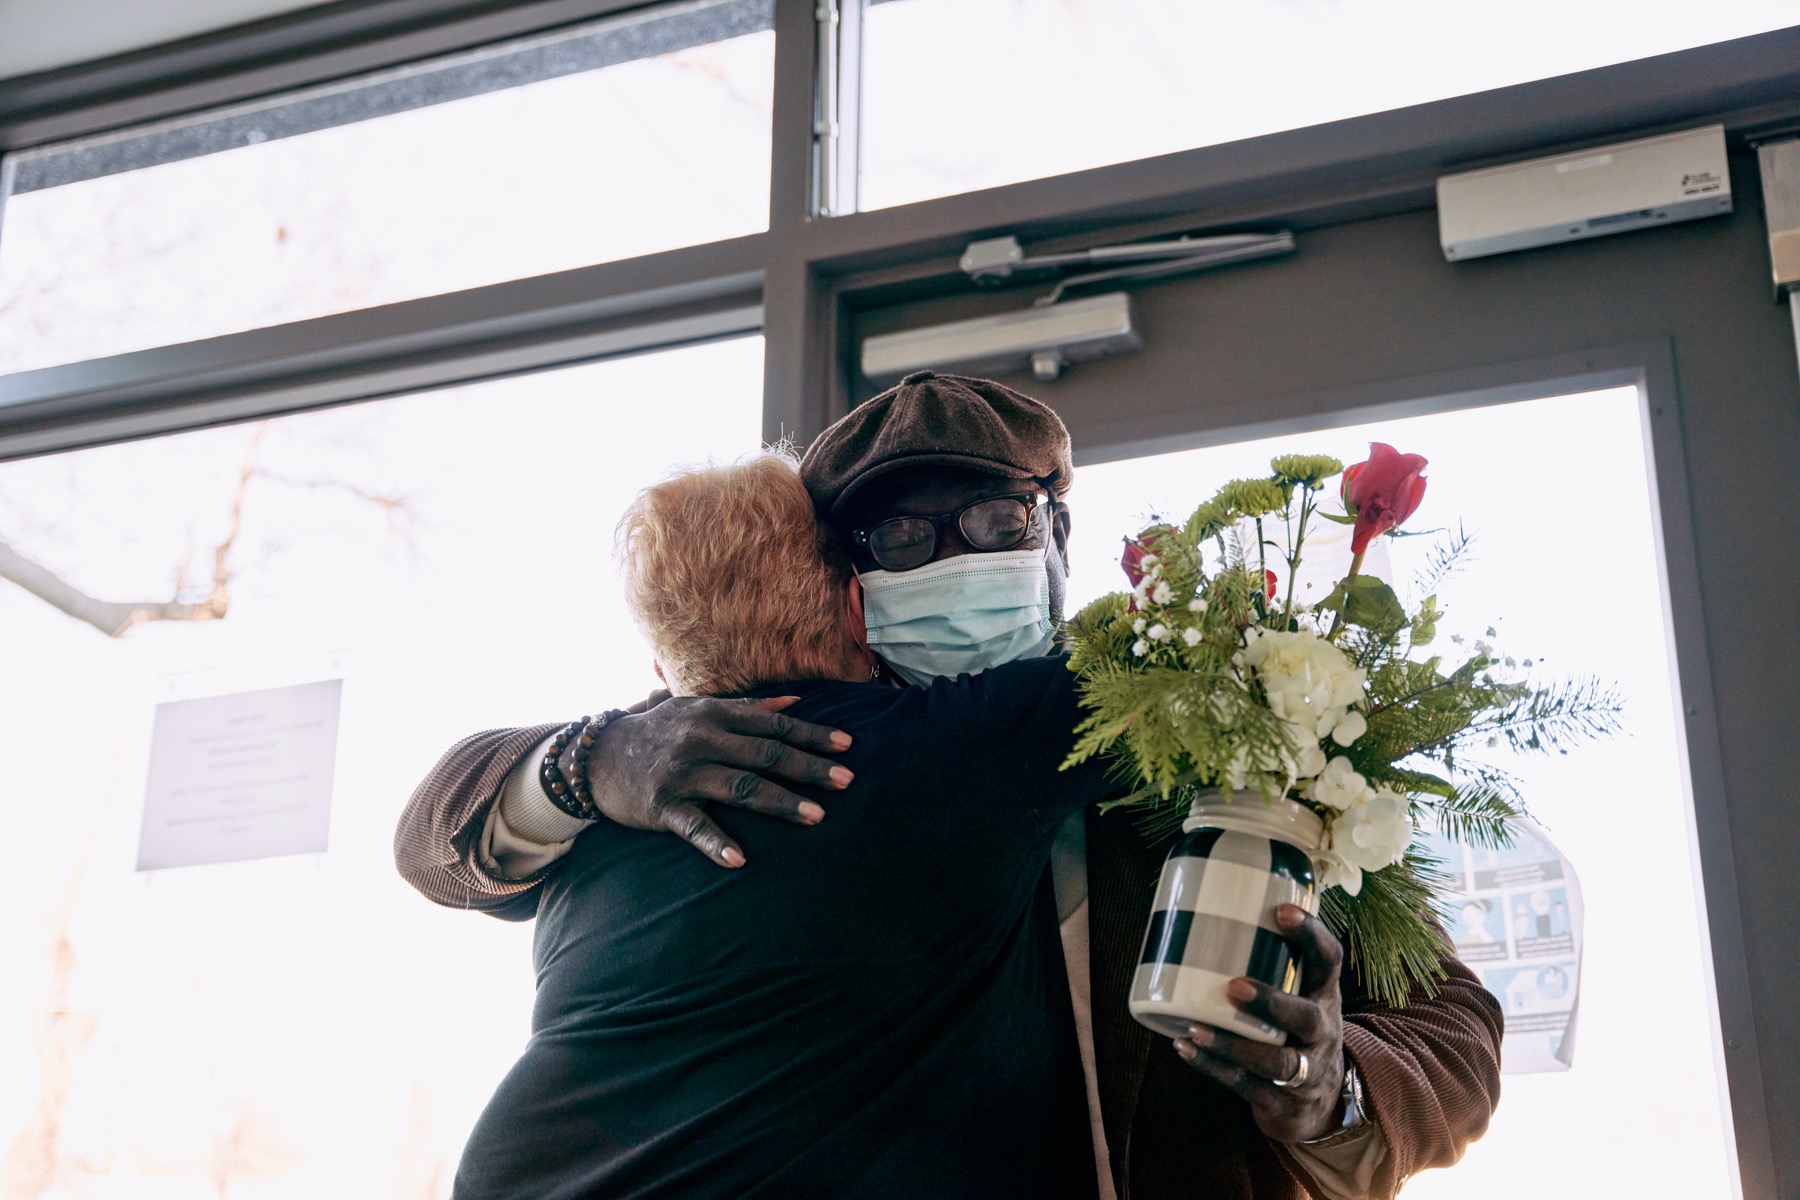 an older black man and an older white woman hug each other. the woman's back is to the camera and the man, wearing a mask, a newsy cap and glasses, is facing the camera, embracing the woman with one arm and holding a bouquet of flowers in his other hand